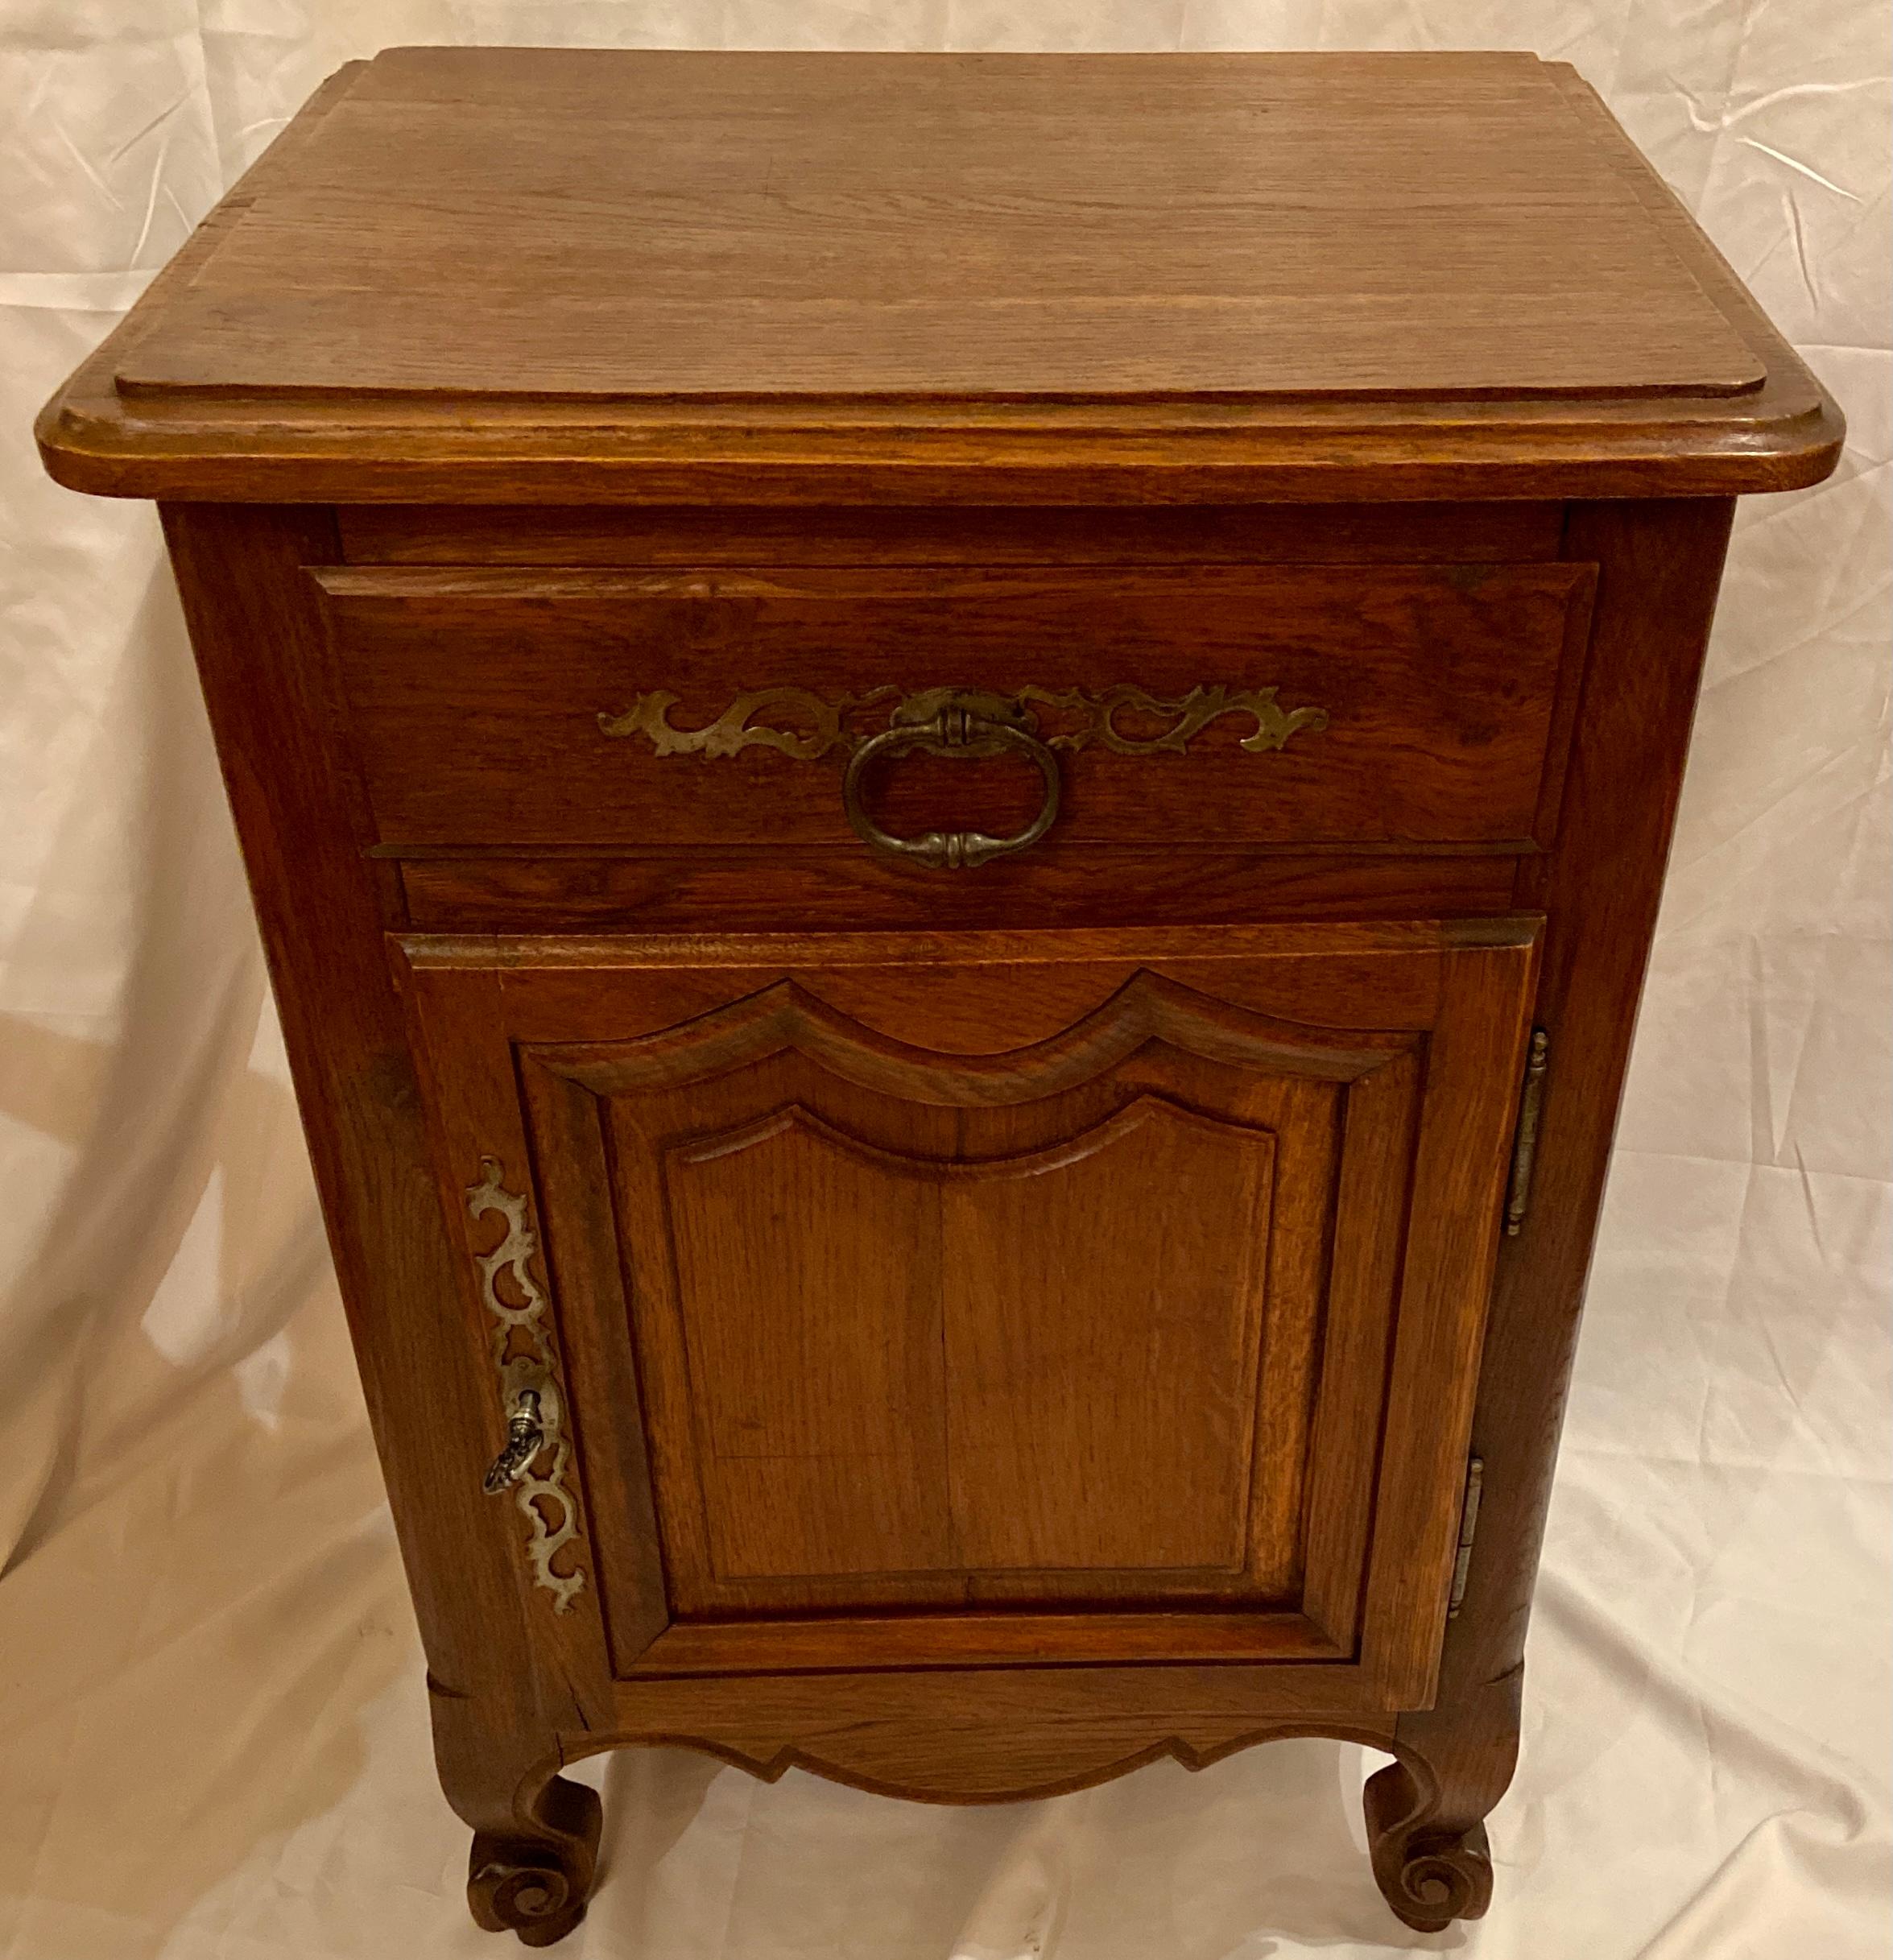 Antique French Country carved oak cabinet, Circa 1910-1920.